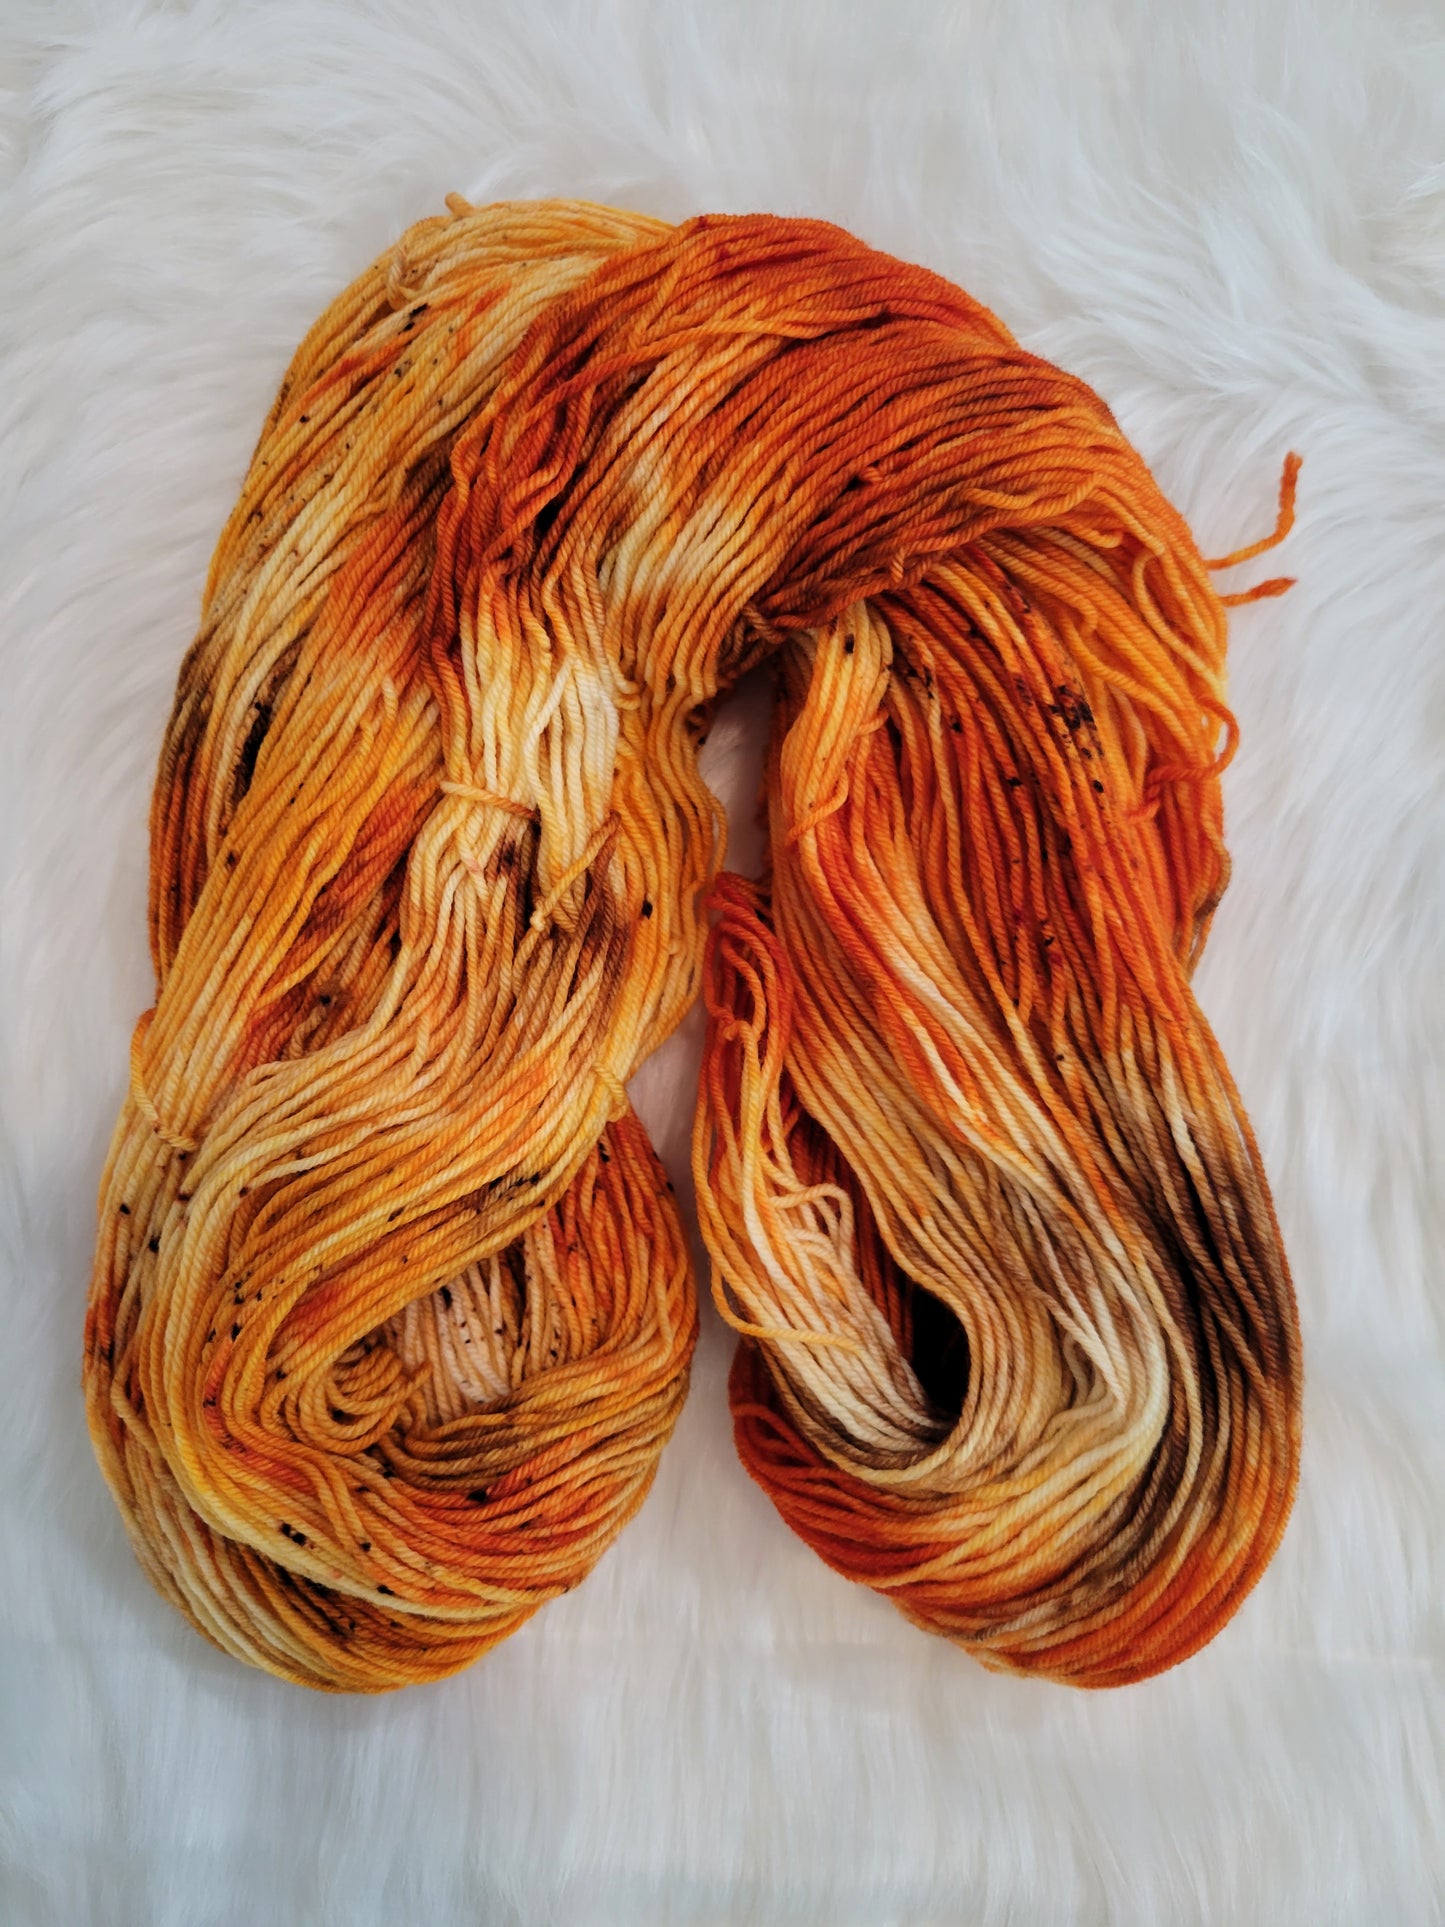 Hand Dyed Yarn - The Red Viper of Dorne